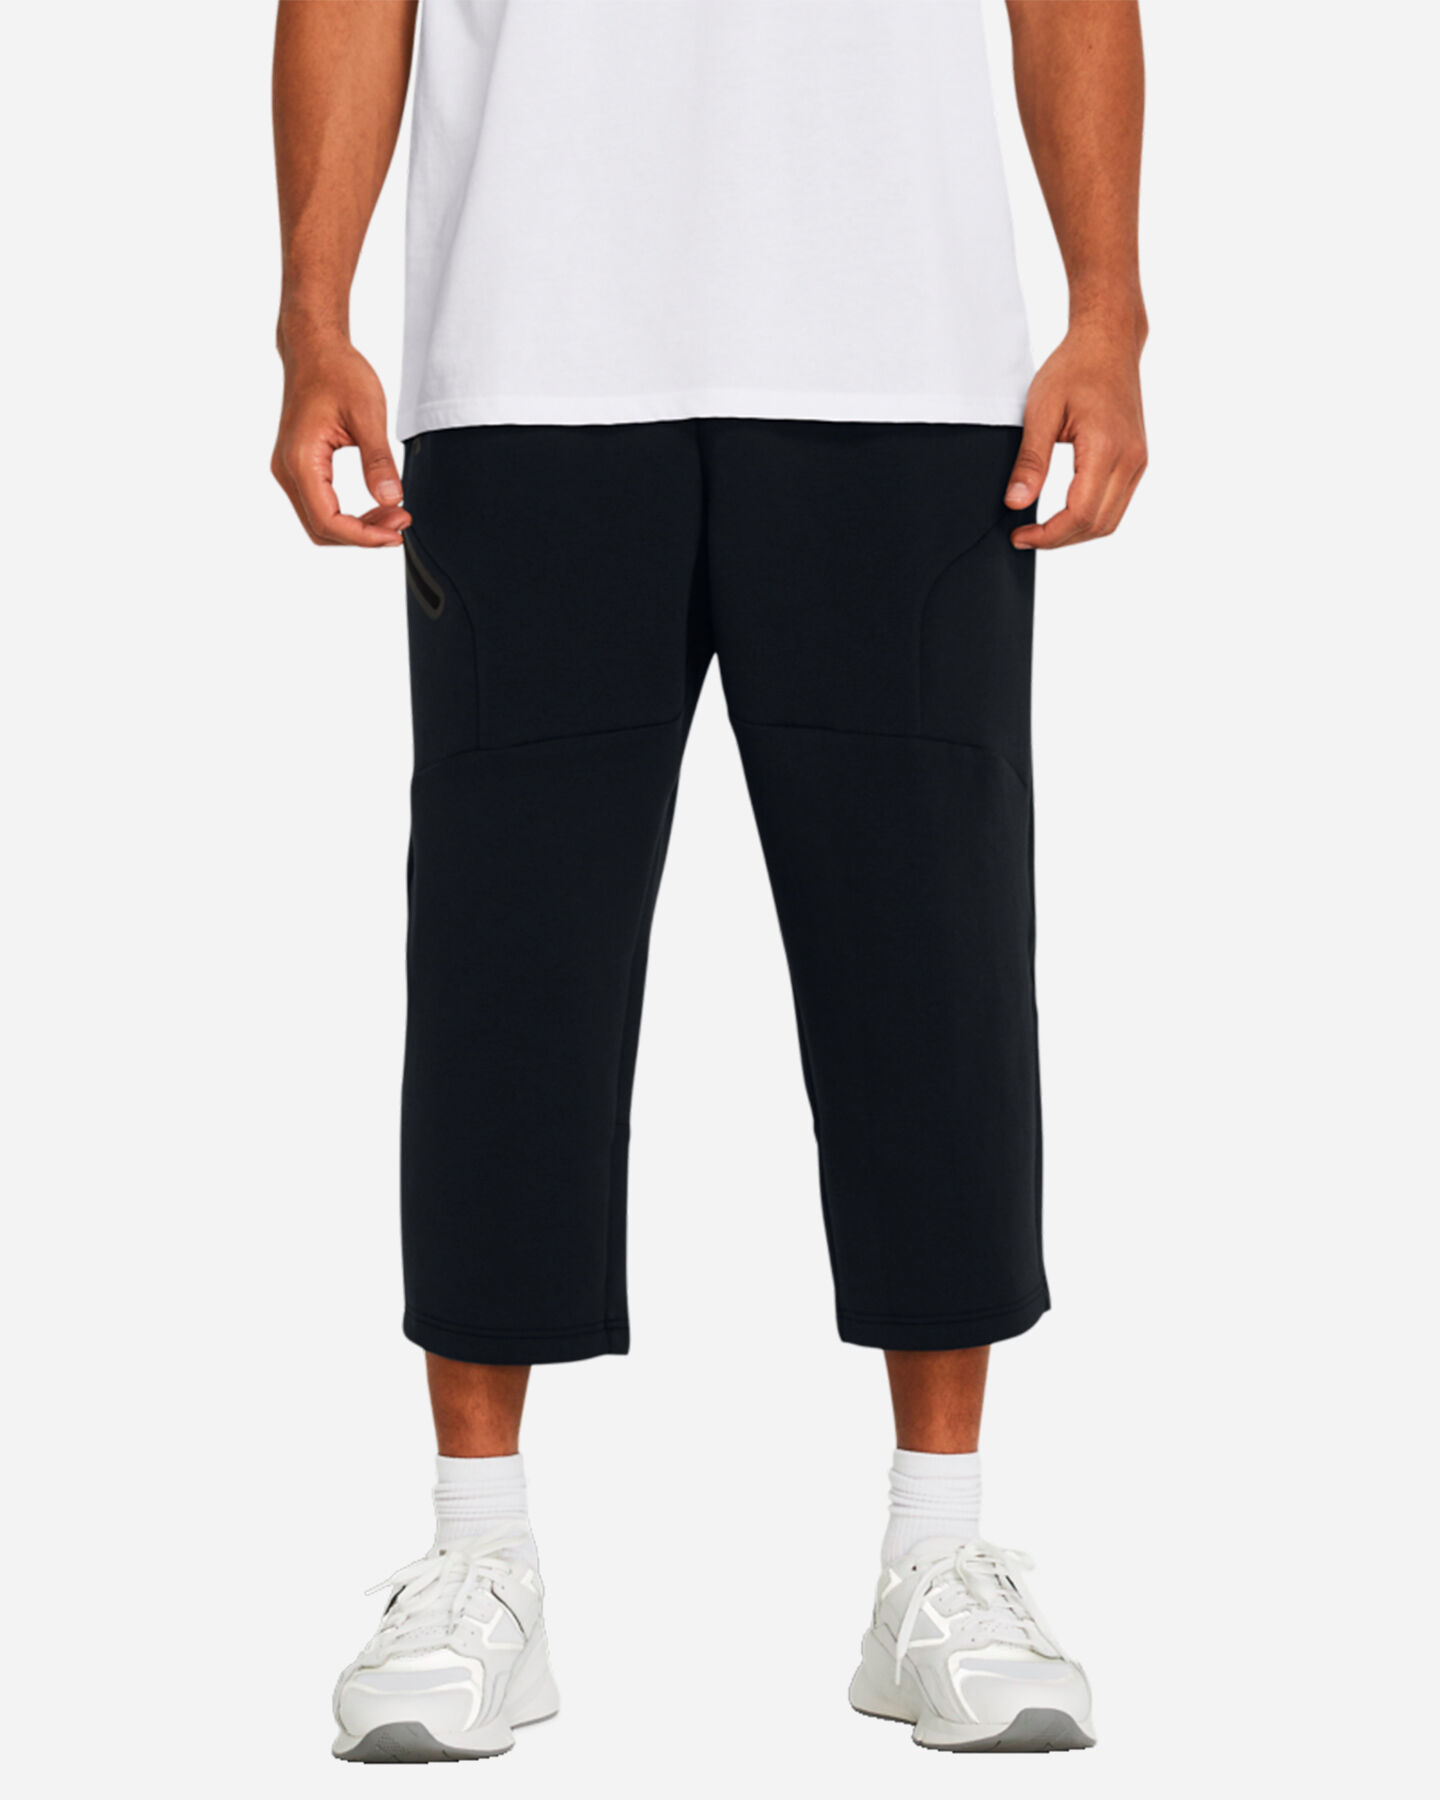  Pantalone UNDER ARMOUR UNSTOPPABLE BAGGY CROP M S5642101|0001|SM scatto 2